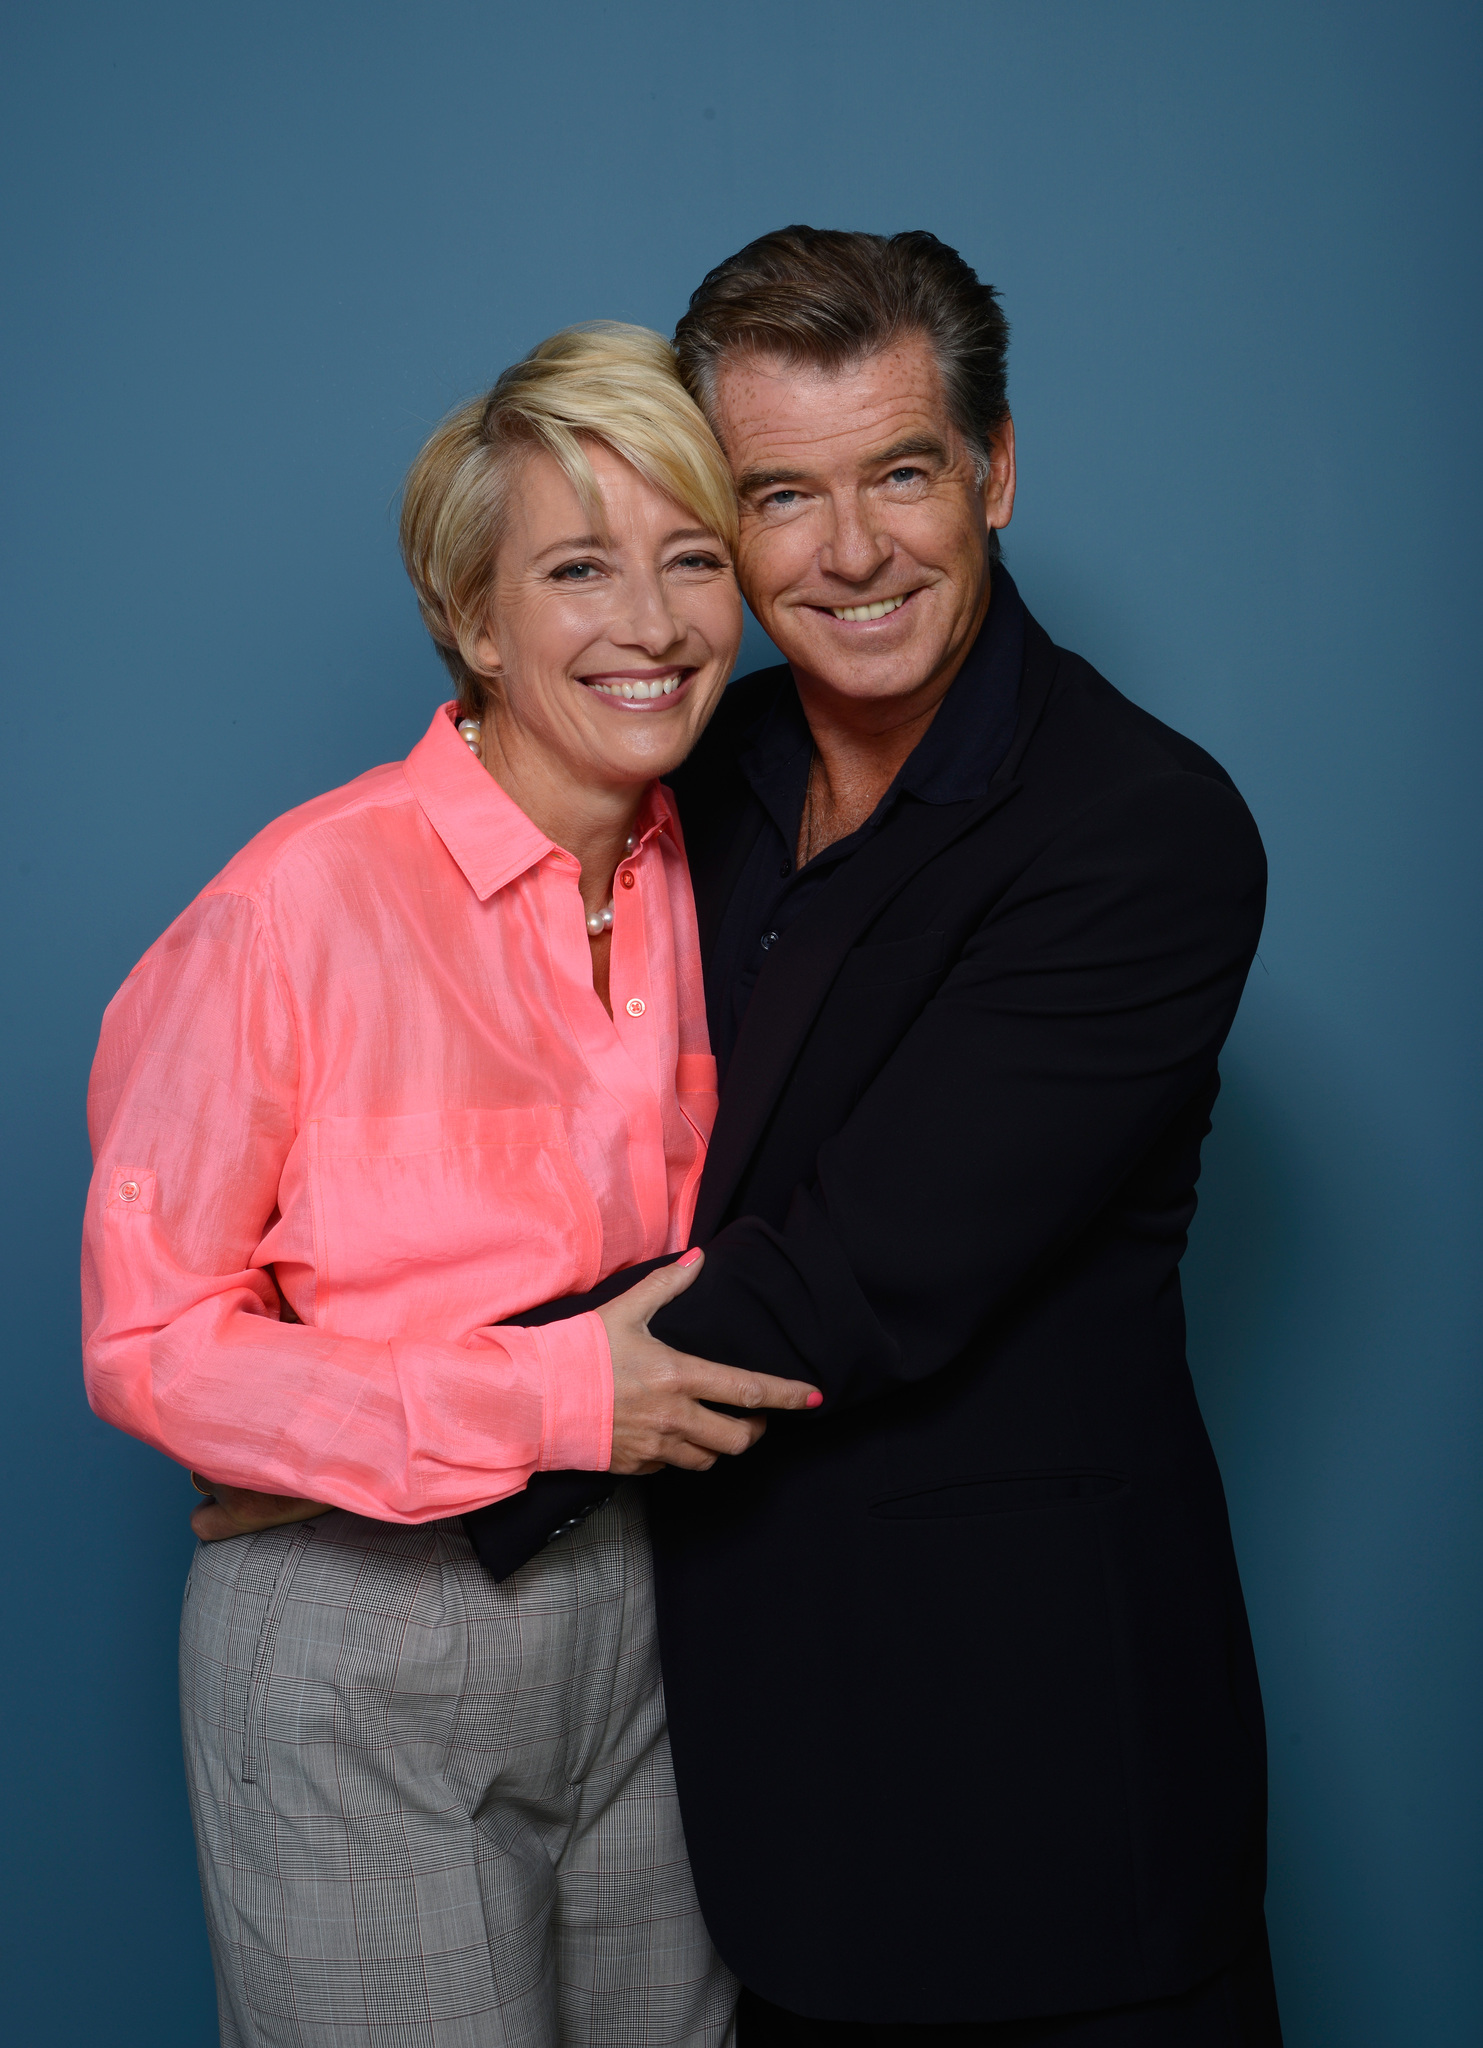 Pierce Brosnan and Emma Thompson at event of Meiles punsas (2013)